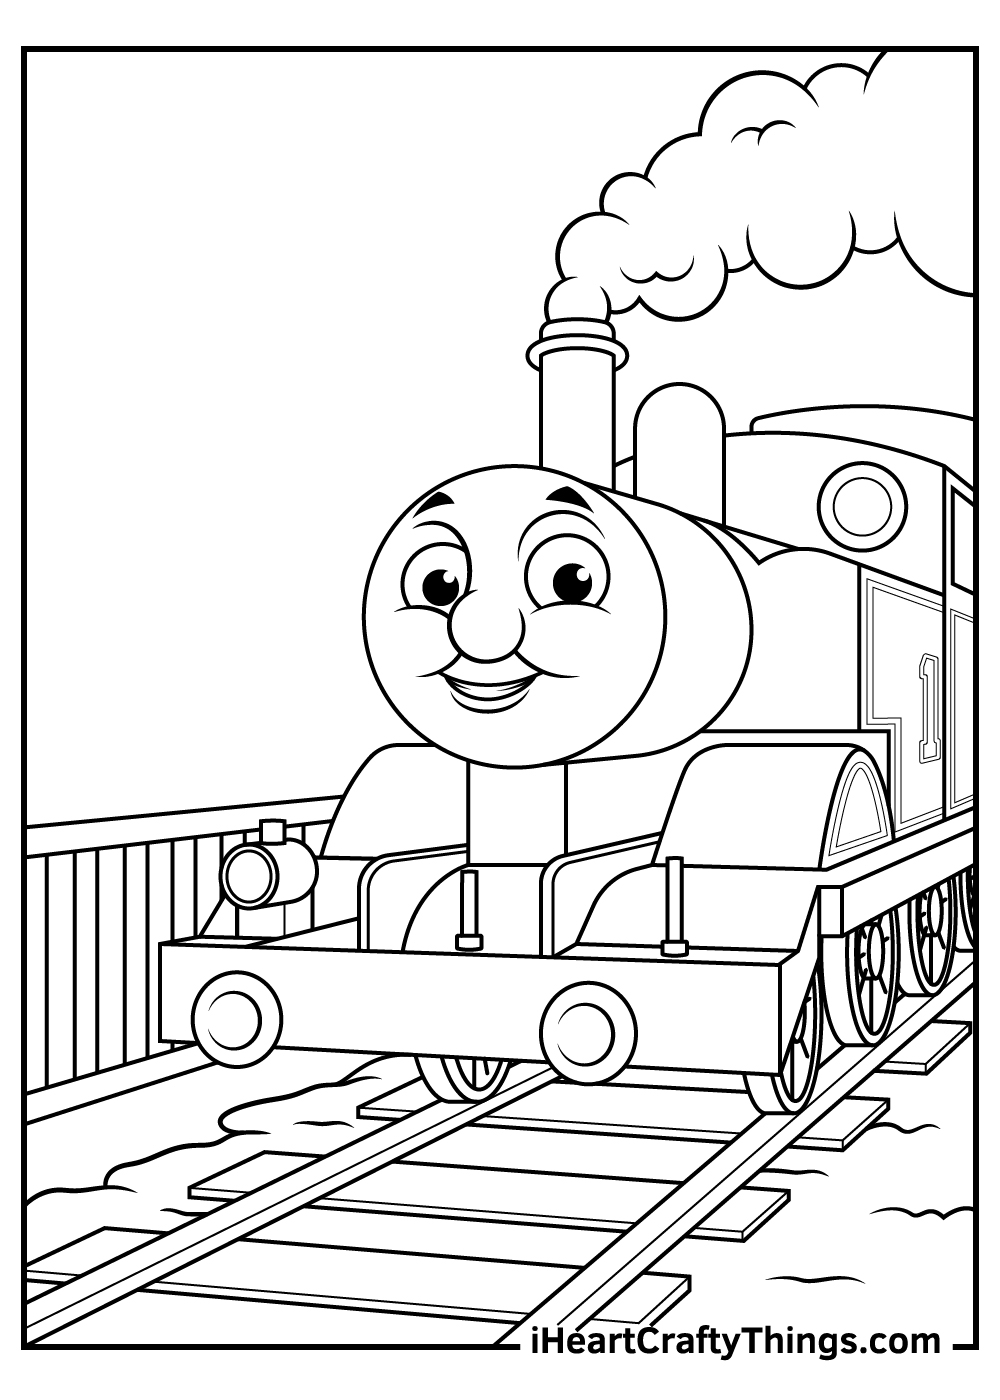 Thomas the train coloring pages free printables